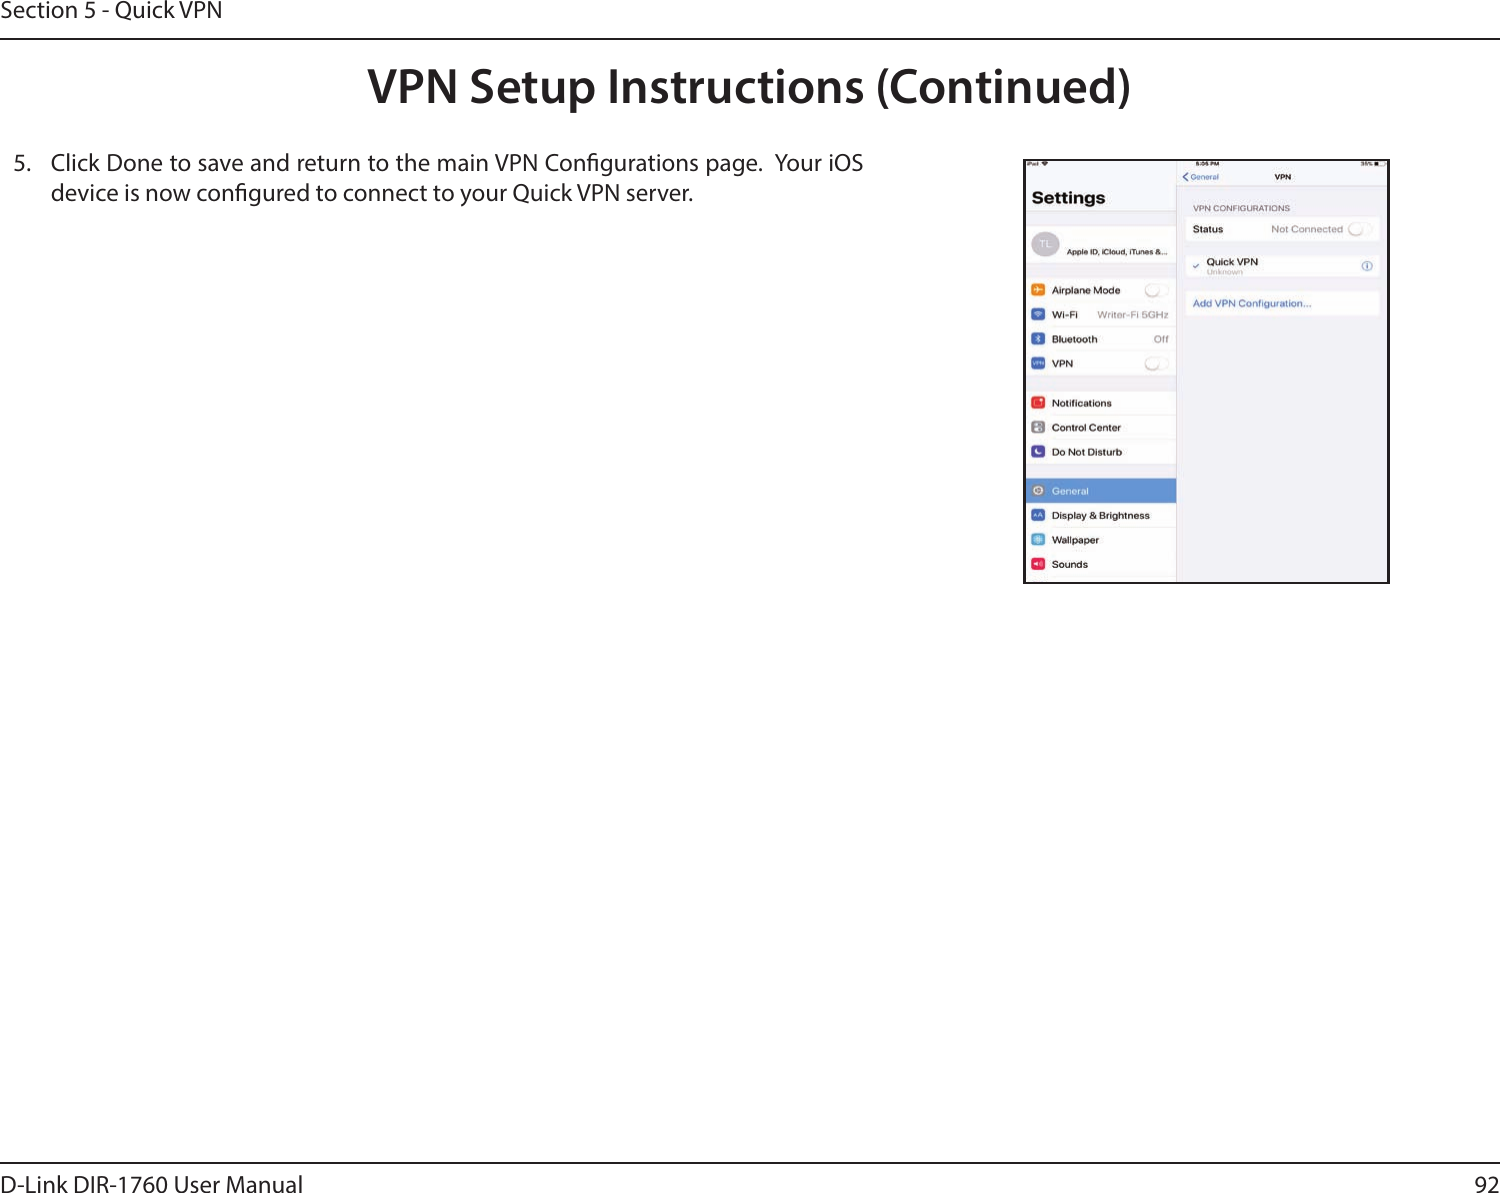 92D-Link DIR-1760 User ManualSection 5 - Quick VPN5.  Click Done to save and return to the main VPN Congurations page.  Your iOS device is now congured to connect to your Quick VPN server.VPN Setup Instructions (Continued)